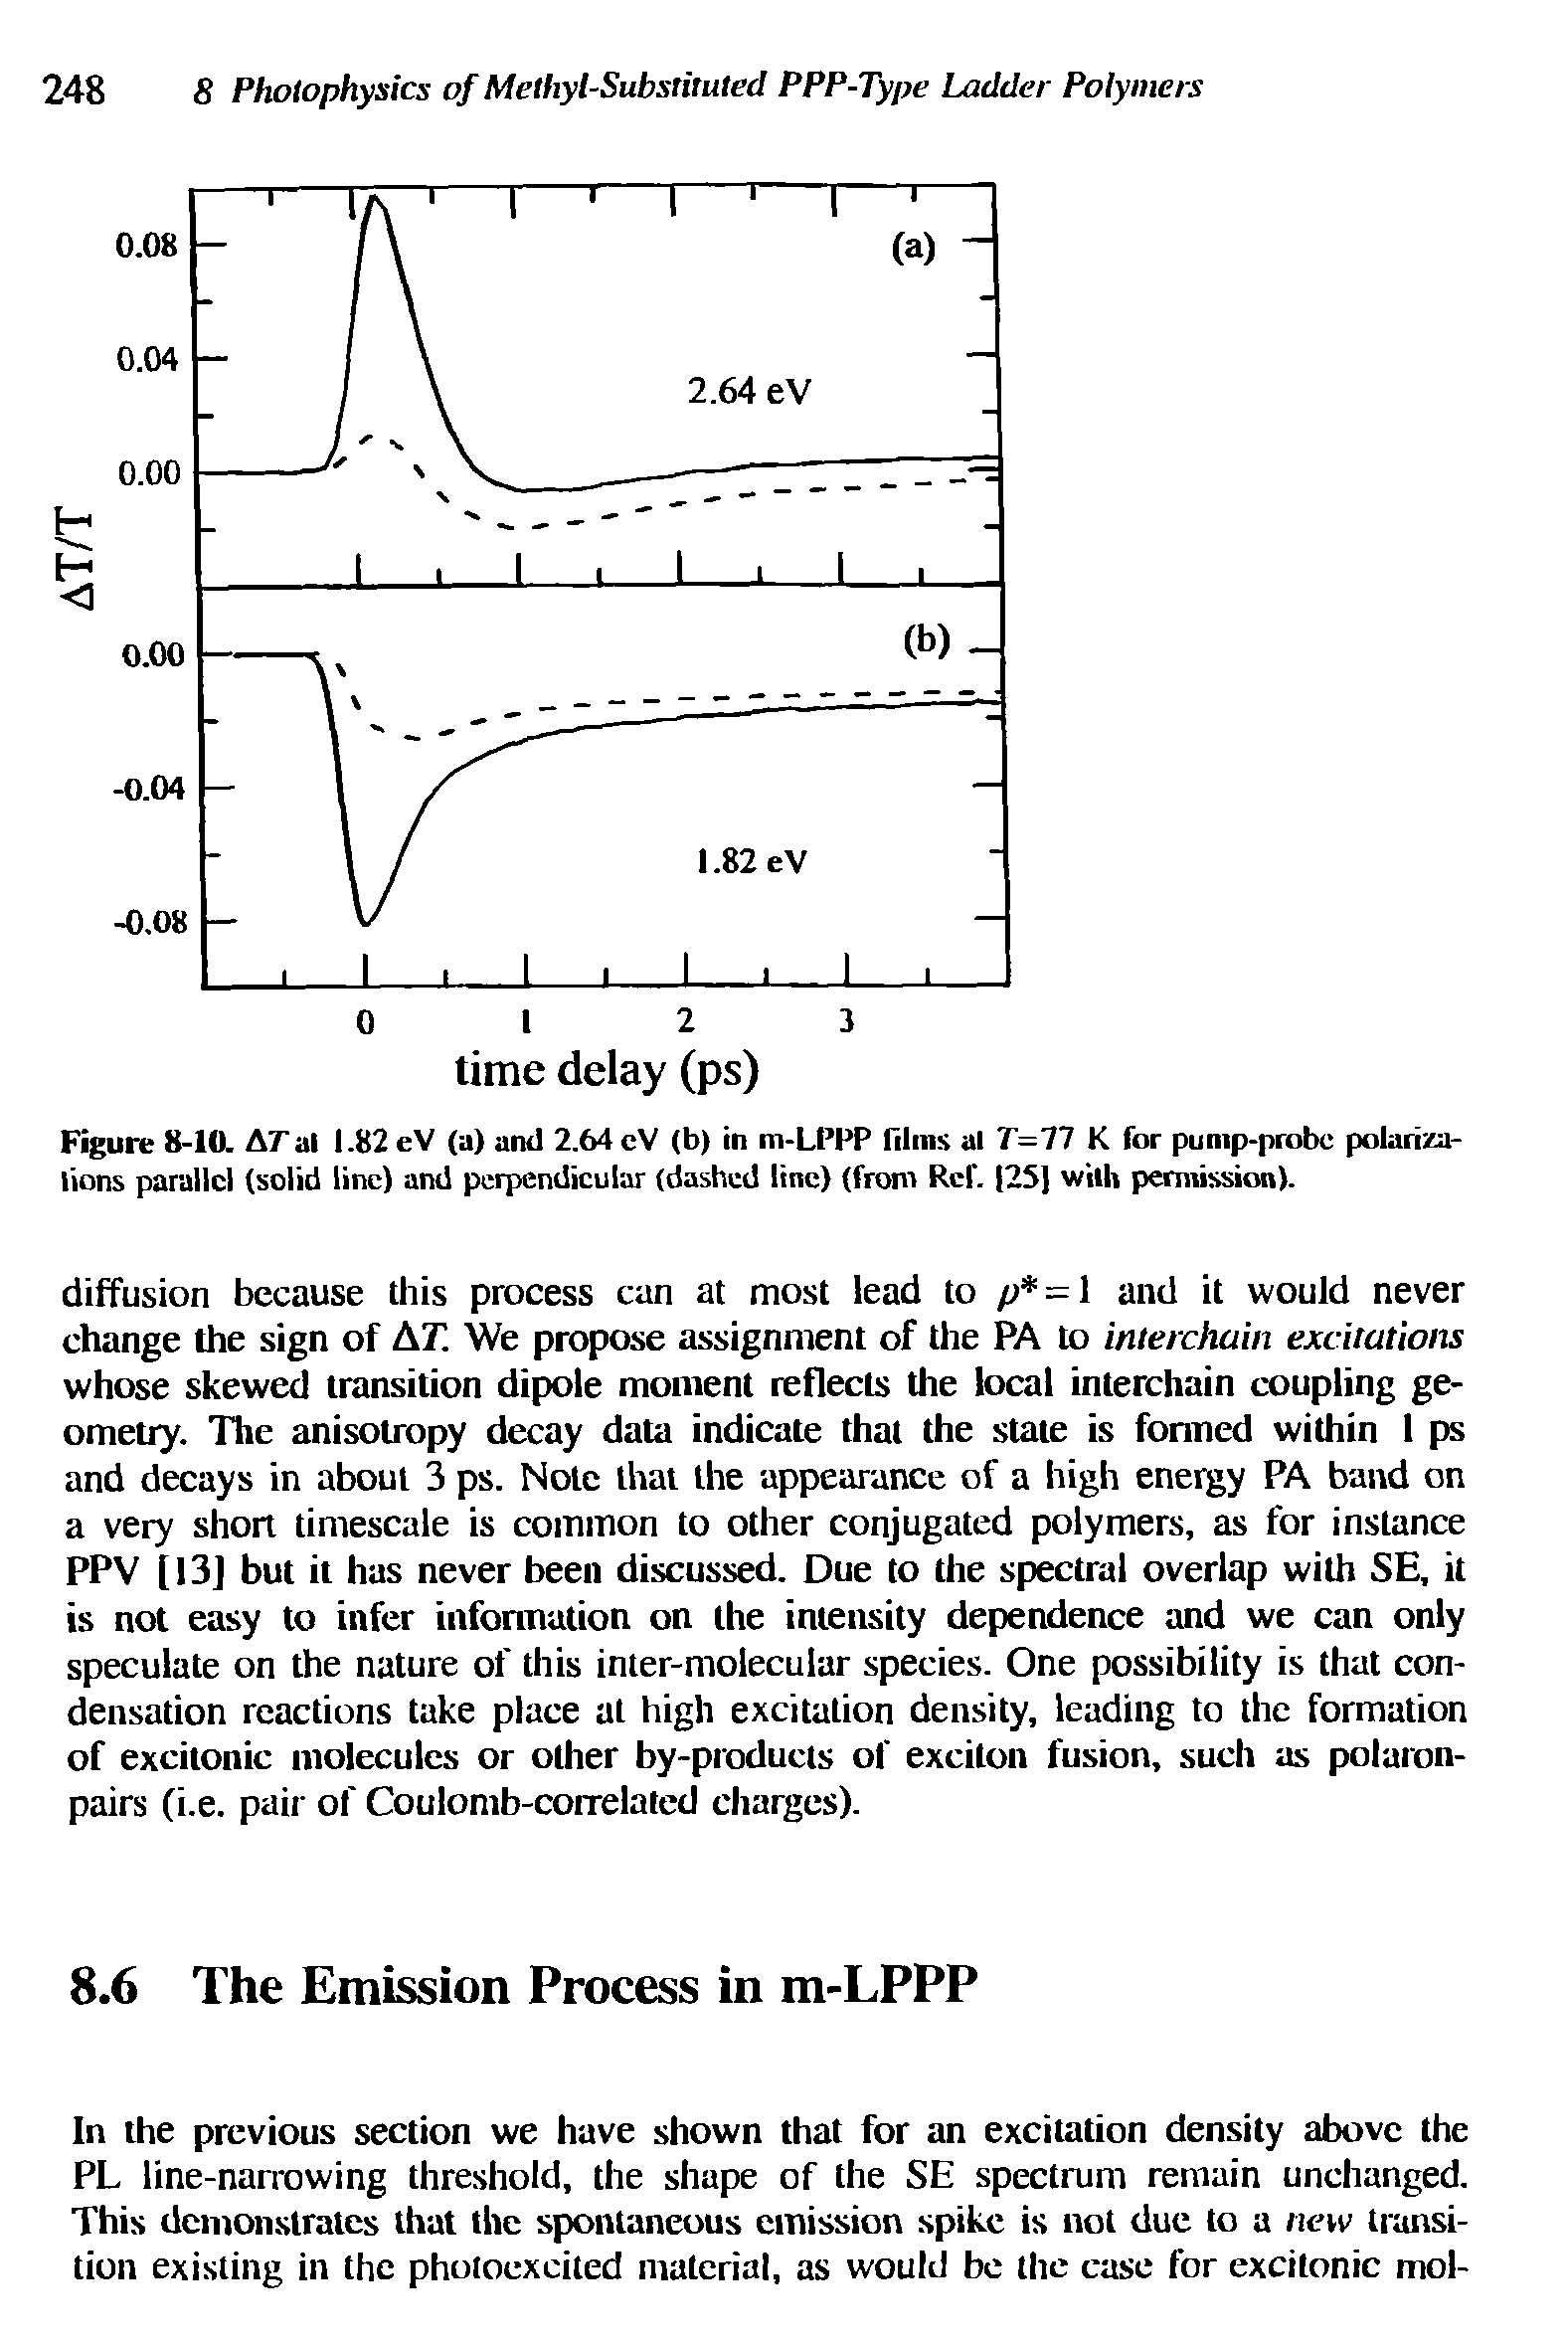 Figure 8-10. Aral 1.82 eV (a) and 2.64 eV (b) in m-LPRP films al 7=77 K for pump-probe polarizations parallel (solid line) and perpendicular (dashed line) (from Ref. 25] with permission).